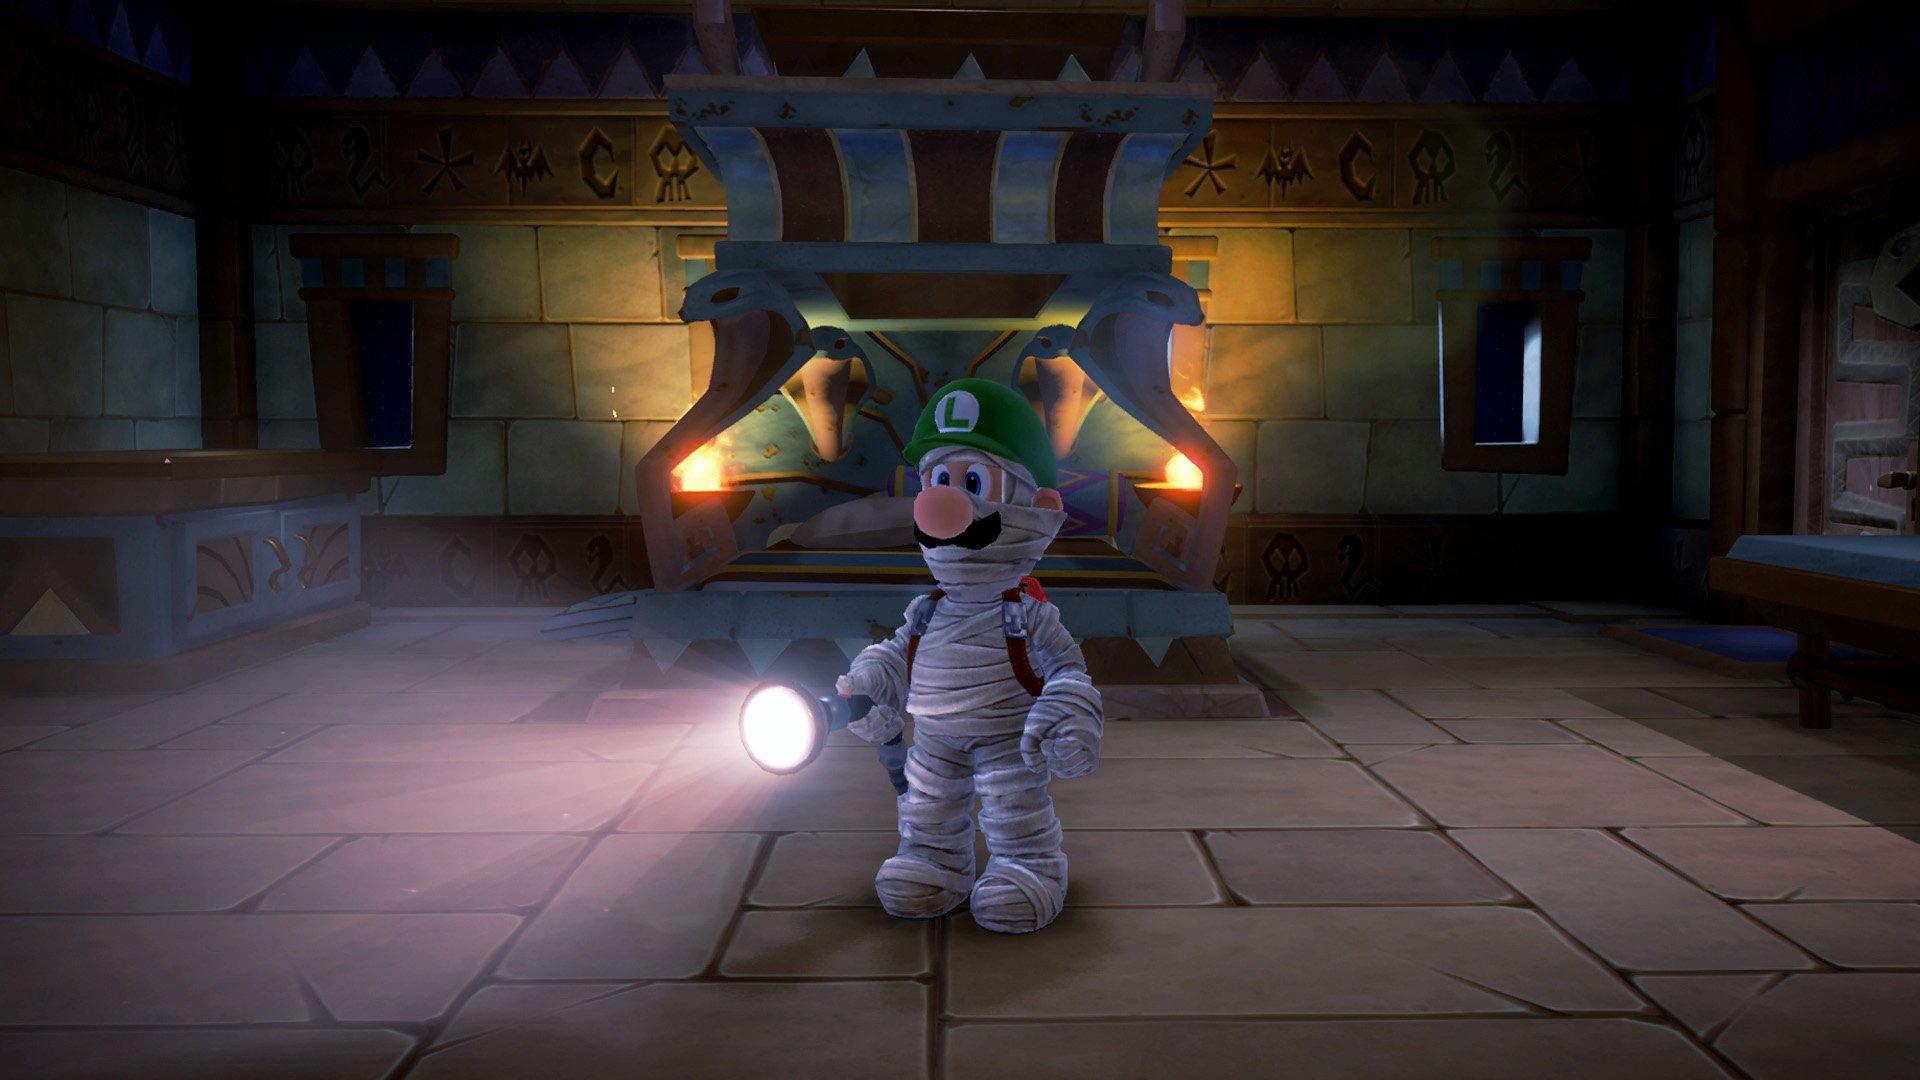 Luigi's Mansion 3 Review - Luigi's Mansion 3 Review – Frights And Delights  - Game Informer